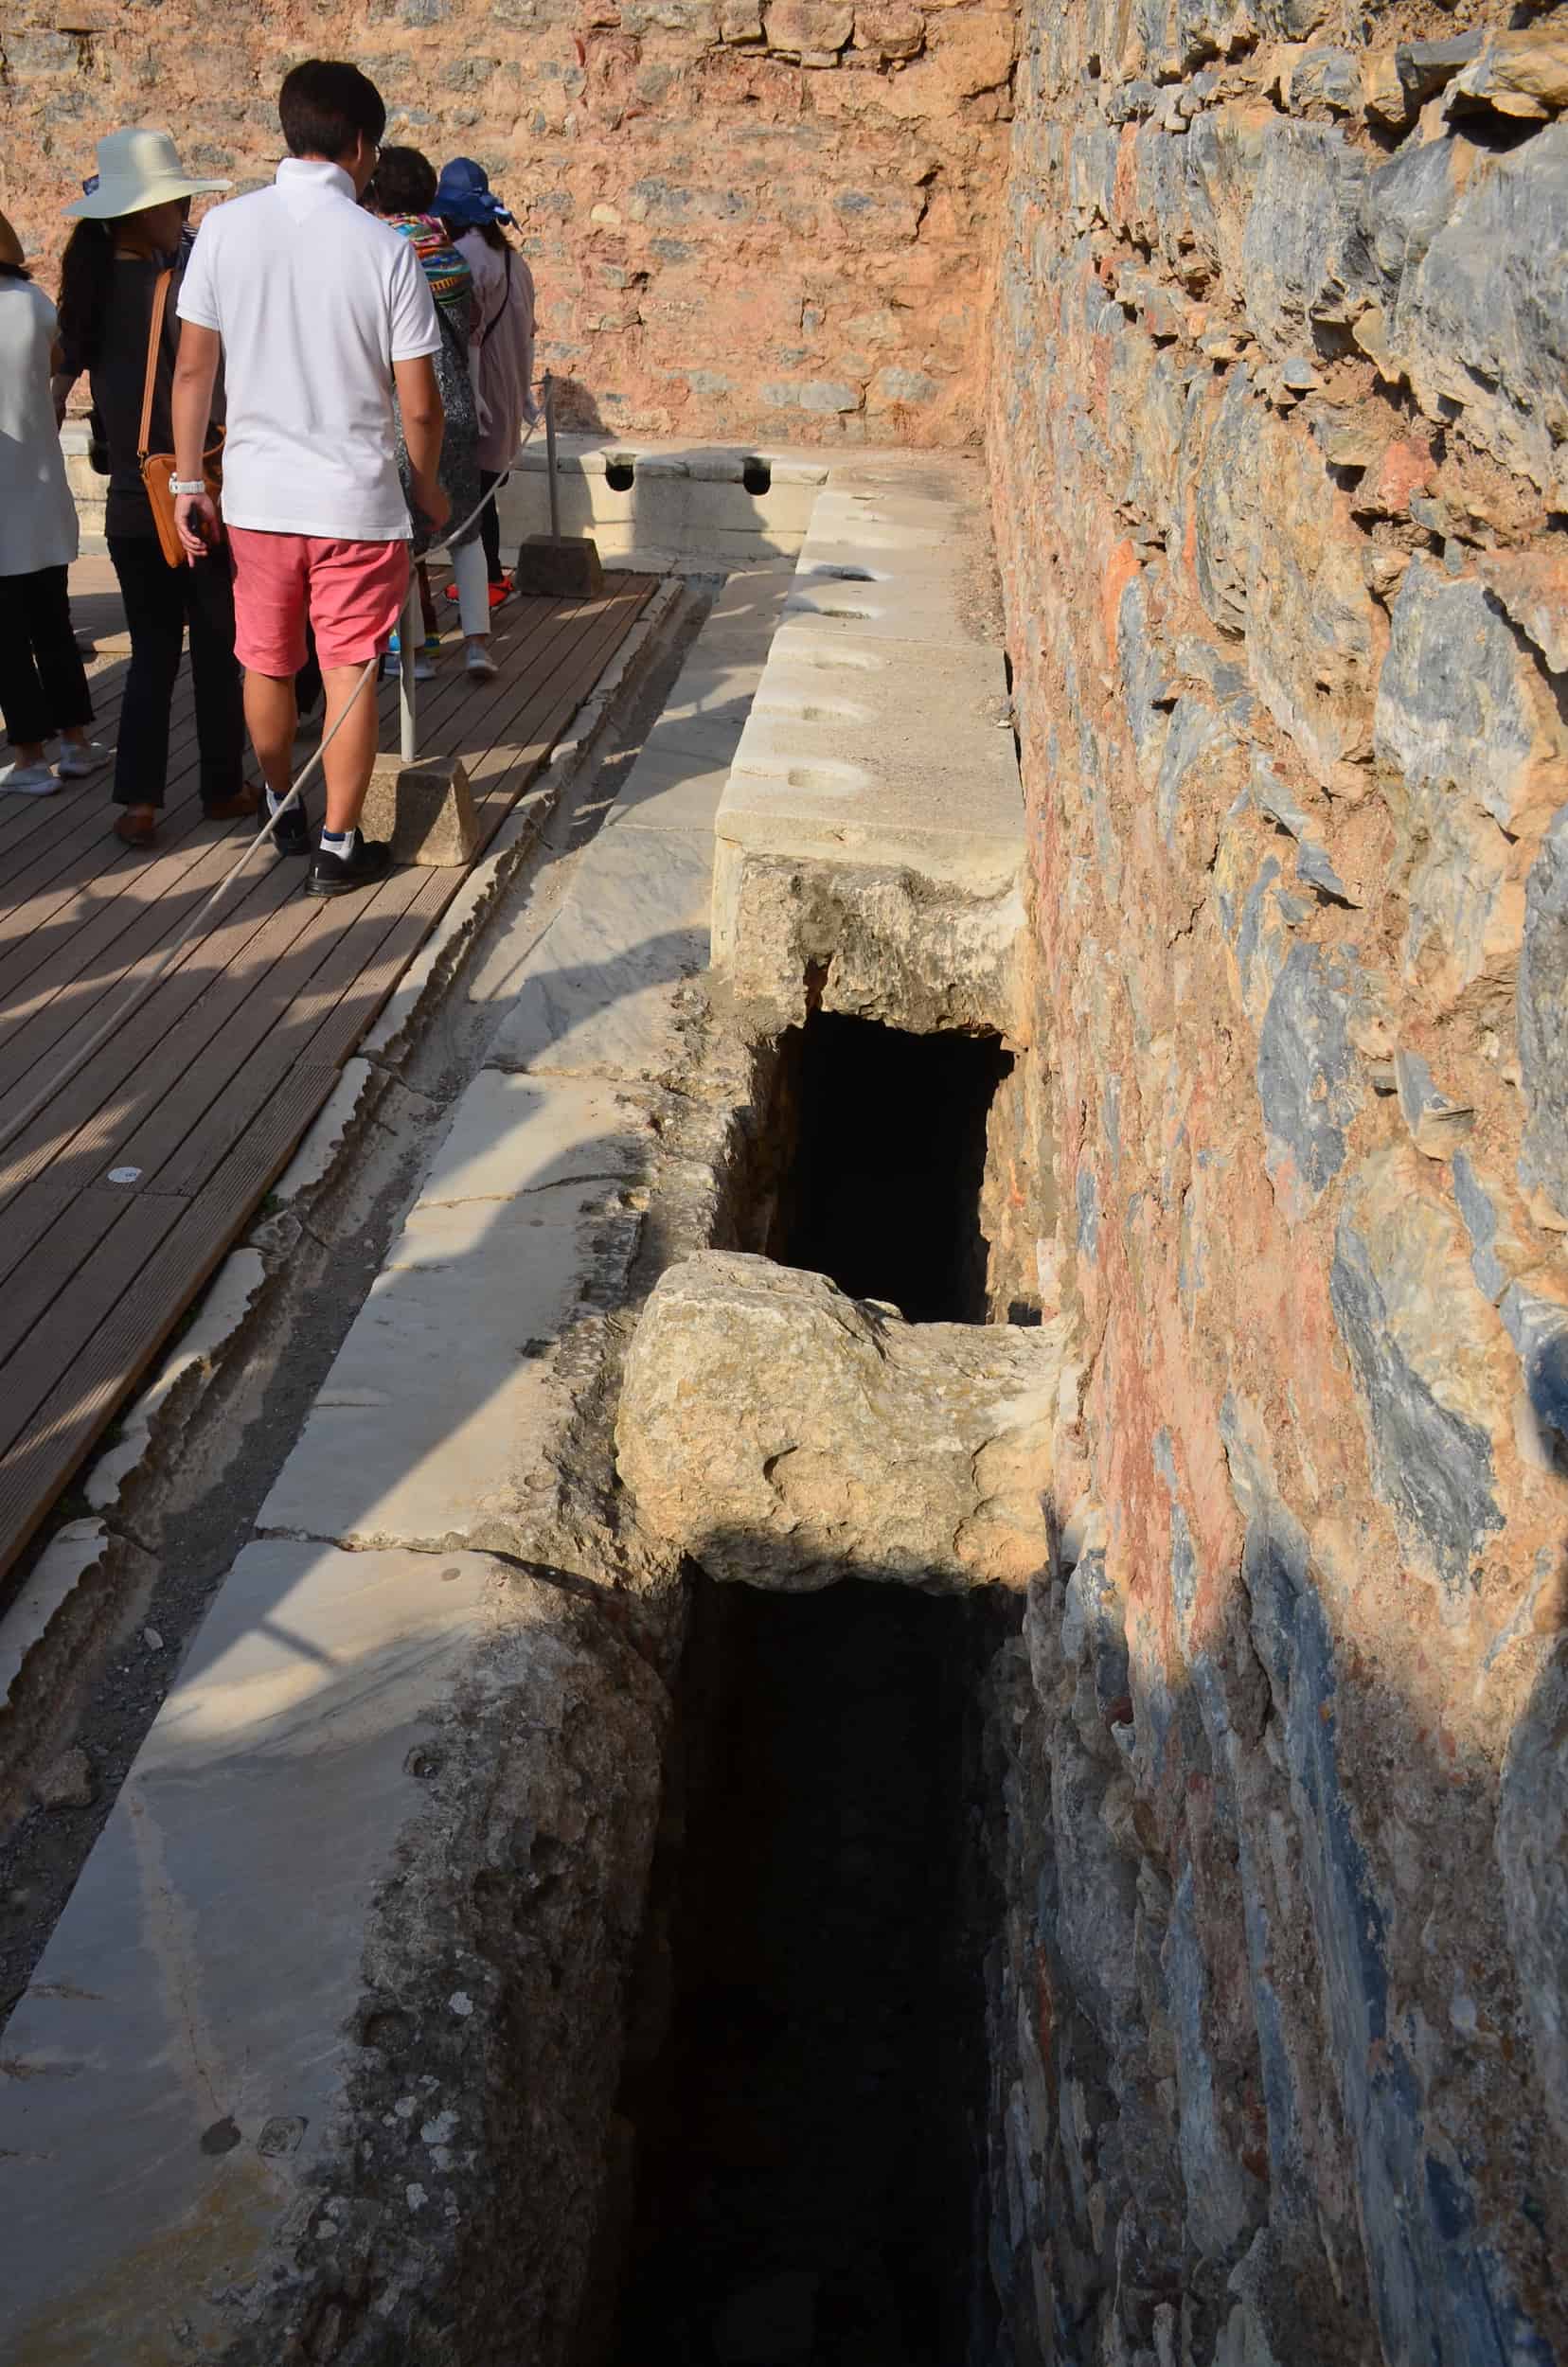 Broken section of toilets at the latrines in Ephesus